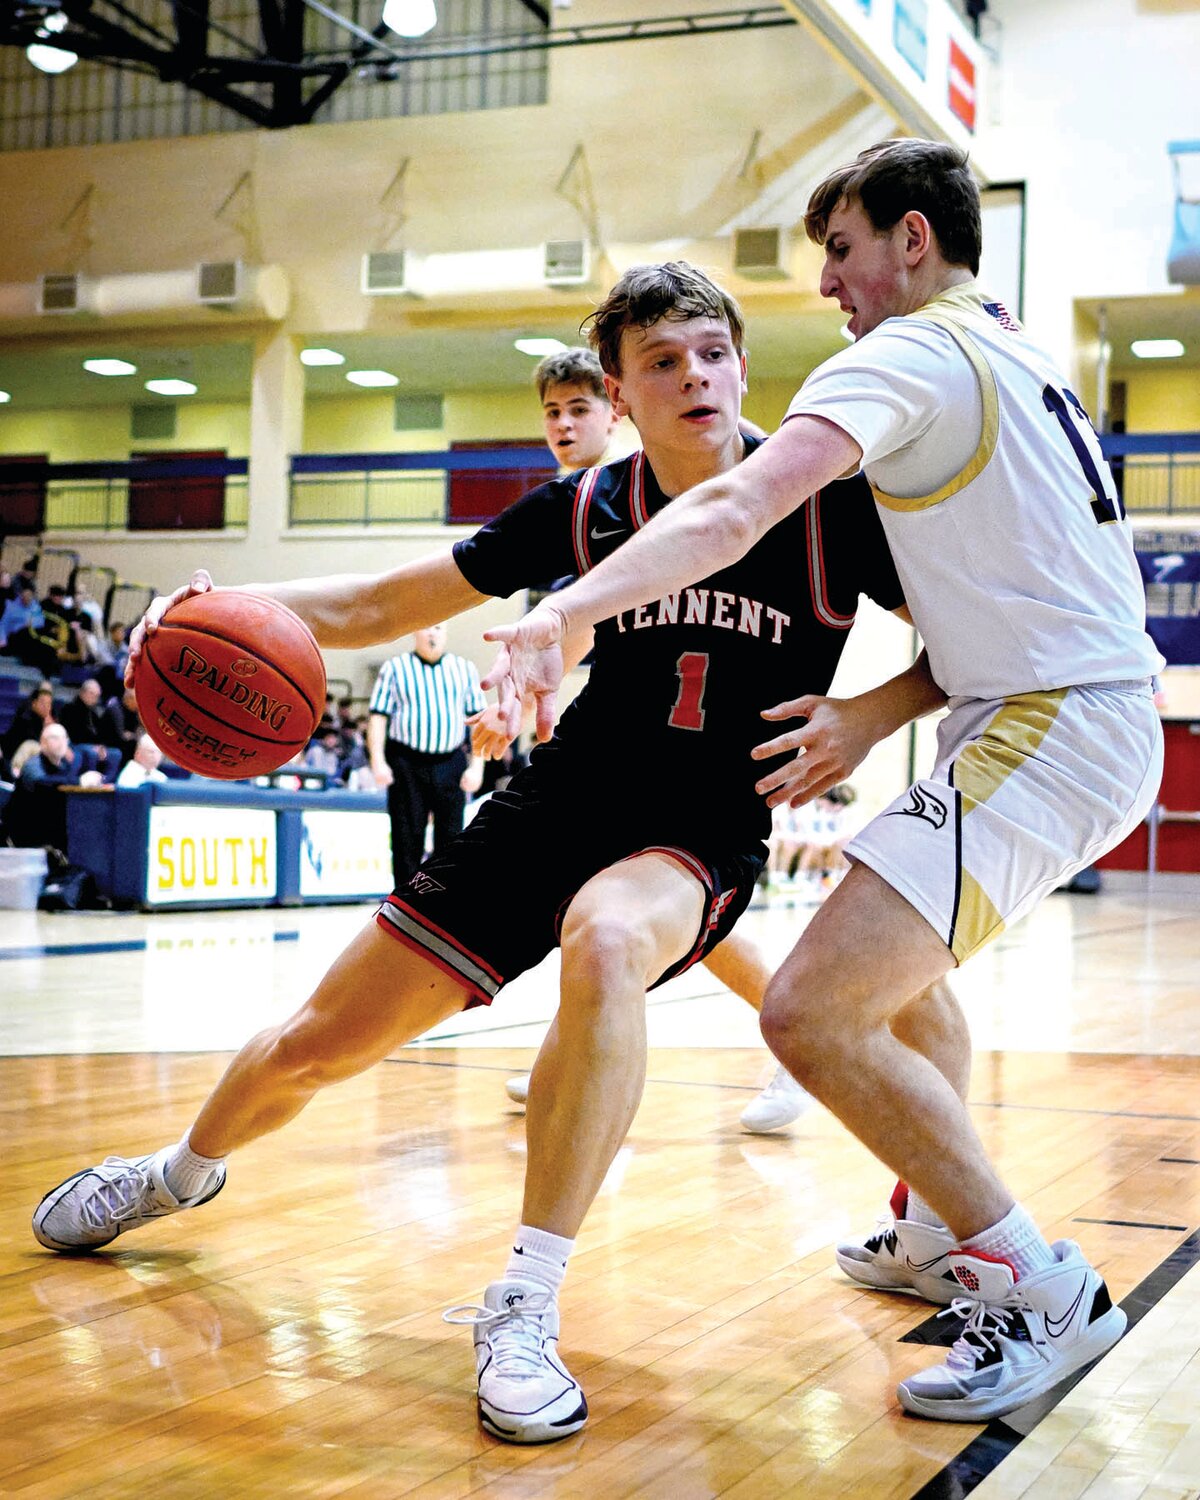 William Tennent’s Kirby Mooney makes his way to the basket around Council Rock South’s Spencer Kredo.